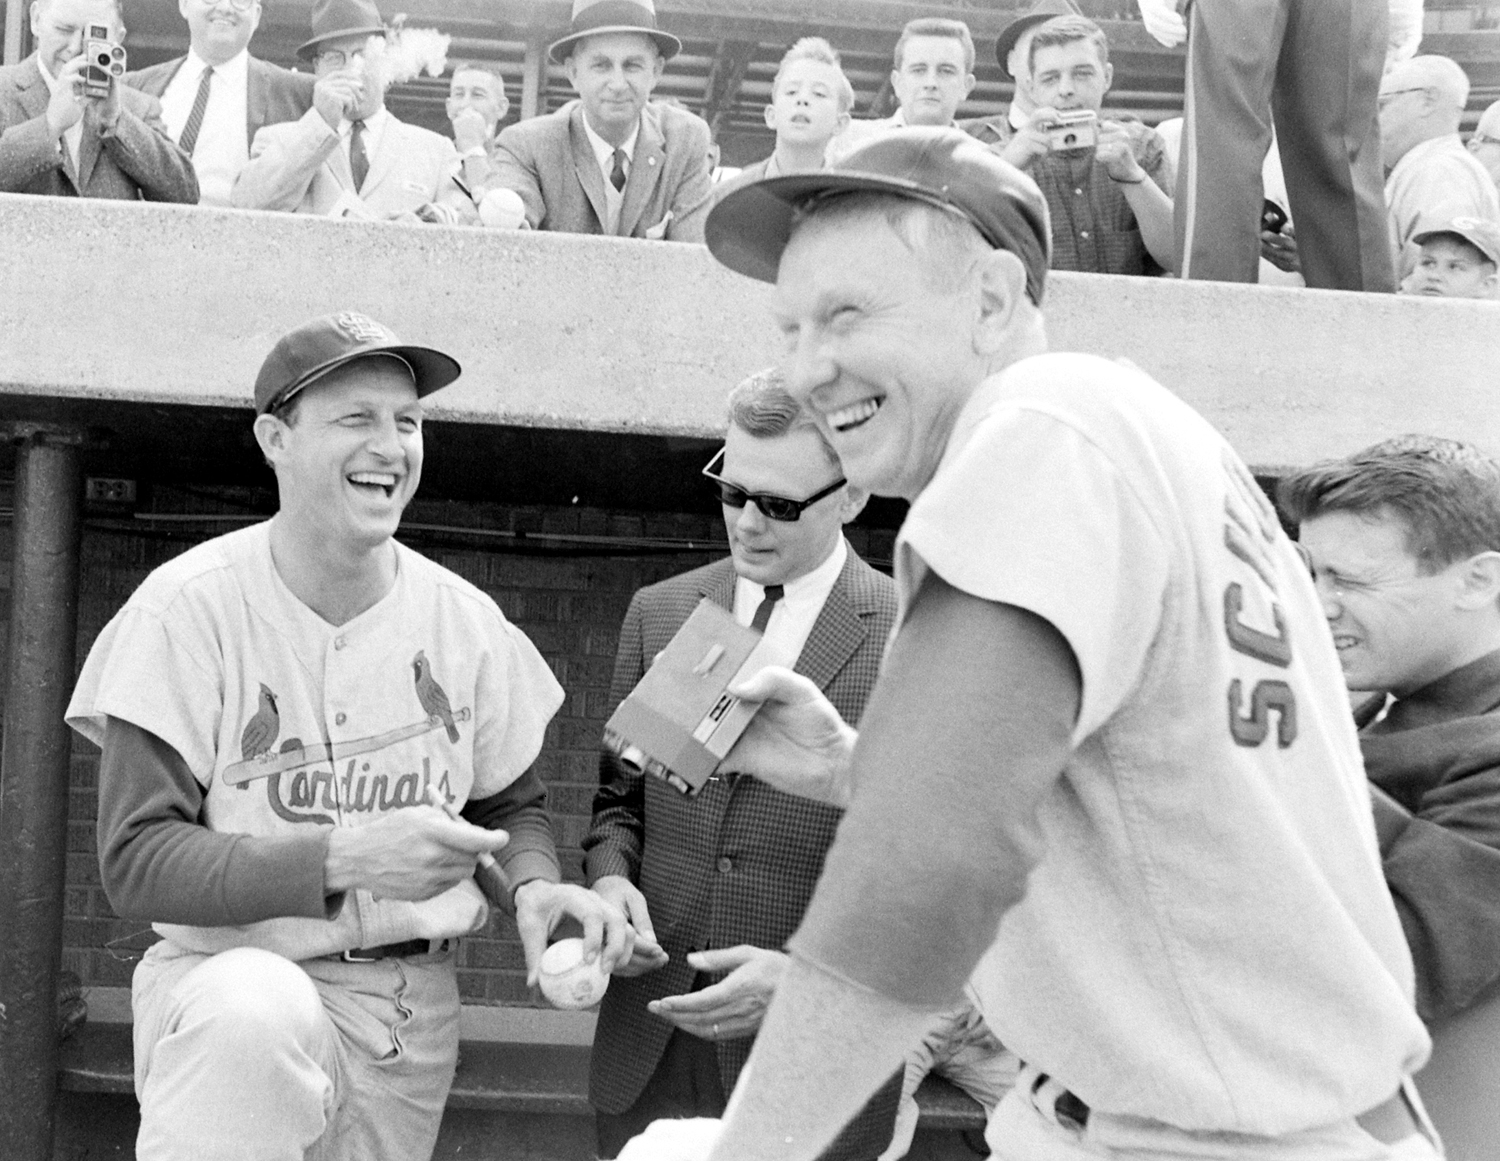 Stan Musial and his old friend and long-time Cardinal, Red Schoendienst (right, with movie camera in hand) on Musial's last day in the majors, 1963.